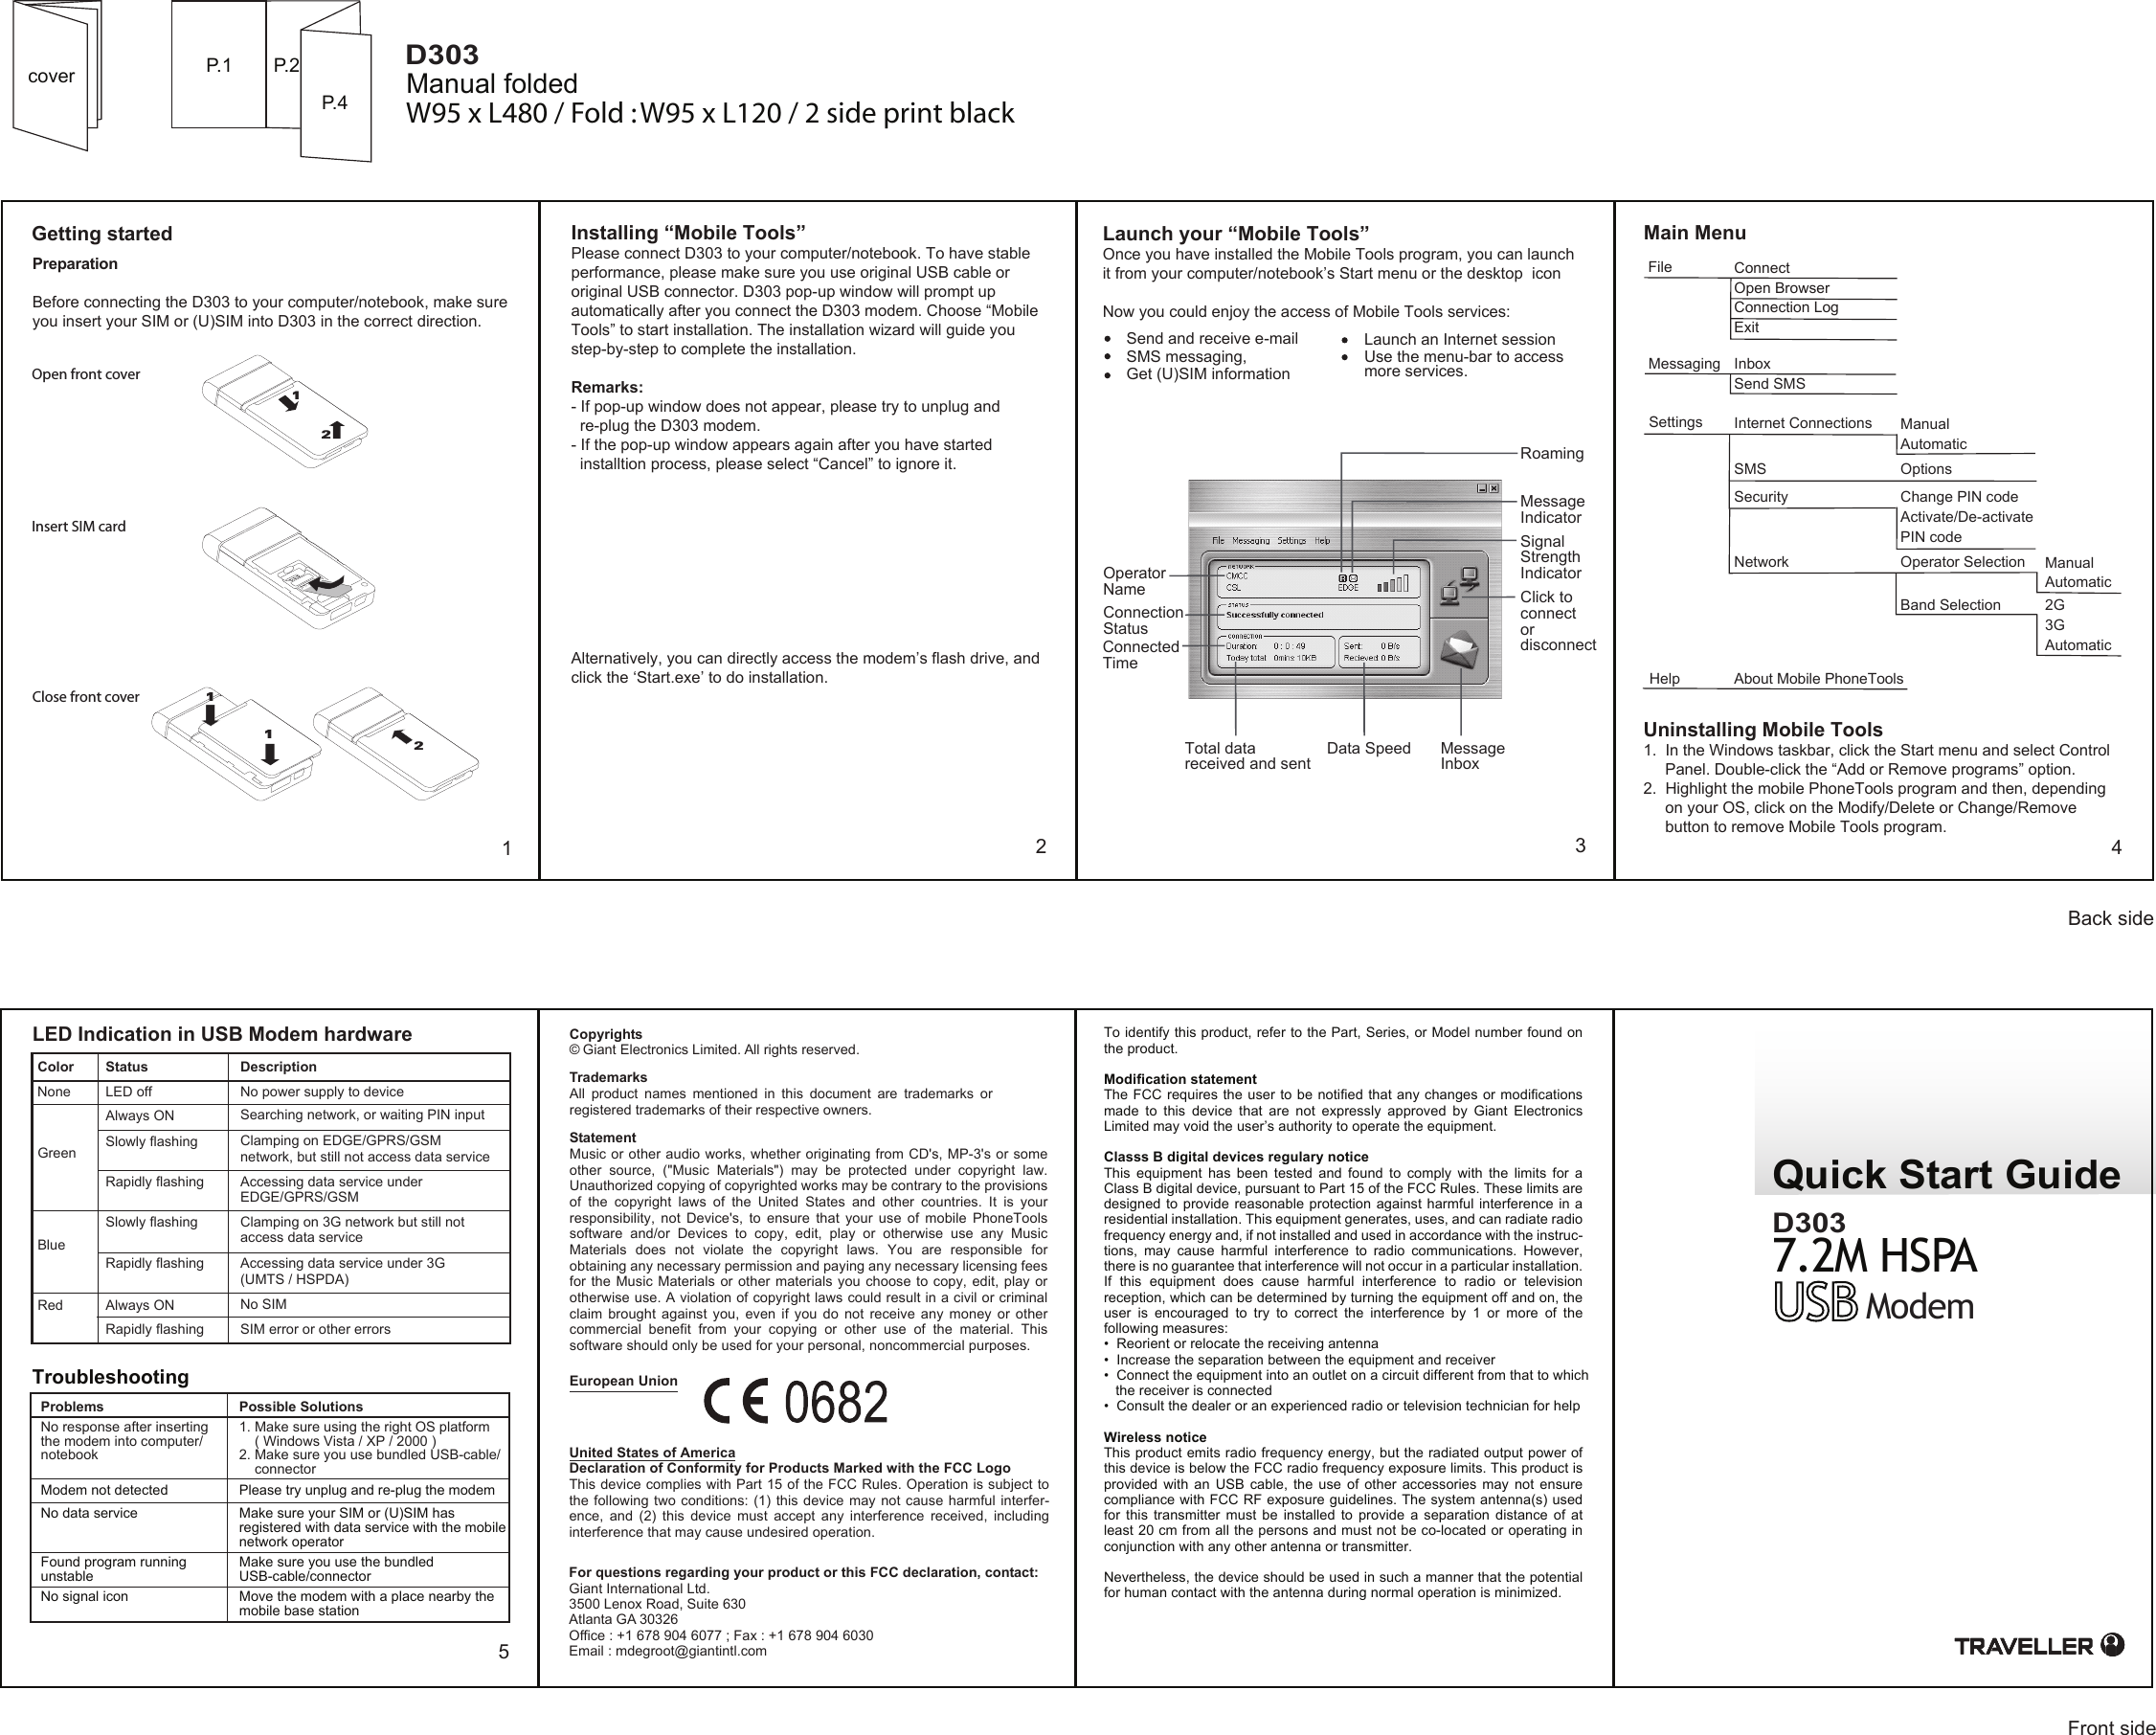 Quick Start GuideCopyrightsTrademarks© Giant Electronics Limited. All rights reserved.All product names mentioned in this document are trademarks orregistered trademarks of their respective owners.For questions regarding your product or this FCC declaration, contact:Giant International Ltd.3500 Lenox Road, Suite 630Atlanta GA 30326Office : +1 678 904 6077 ; Fax : +1 678 904 6030Email : mdegroot@giantintl.comGetting started12534Main MenuSend and receive e-mailSMS messaging,Get (U)SIM informationLaunch an Internet sessionUse the menu-bar to access more services.coverStatementMusic or other audio works, whether originating from CD&apos;s, MP-3&apos;s or some other  source,  (&quot;Music  Materials&quot;)  may  be  protected  under  copyright  law. Unauthorized copying of copyrighted works may be contrary to the provisions of  the  copyright  laws  of  the  United  States  and  other  countries.  It  is  your responsibility,  not Device&apos;s,  to  ensure  that  your  use  of  mobile  PhoneTools software  and/or  Devices  to  copy,  edit,  play  or  otherwise  use  any  Music Materials  does  not  violate  the  copyright  laws.  You  are  responsible  for obtaining any necessary permission and paying any necessary licensing fees for the Music Materials or other materials you choose to copy, edit, play or otherwise use. A violation of copyright laws could result in a civil or criminal claim  brought  against you,  even  if  you  do not  receive  any  money  or  other commercial  benefit  from  your  copying  or  other  use  of  the  material.  This software should only be used for your personal, noncommercial purposes.European UnionUnited States of AmericaDeclaration of Conformity for Products Marked with the FCC LogoThis device complies with Part 15 of the FCC Rules. Operation is subject to the following two conditions: (1) this device may not cause harmful interfer-ence,  and  (2)  this  device  must  accept  any  interference  received,  including interference that may cause undesired operation.To identify this product, refer to the Part, Series, or Model number found on the product.Modification statementThe FCC requires the user to be notified  that any changes or modifications made  to  this  device  that  are  not  expressly  approved  by  Giant  Electronics Limited may void the user’s authority to operate the equipment.Classs B digital devices regulary noticeThis  equipment  has  been  tested  and  found  to  comply  with  the  limits  for  a Class B digital device, pursuant to Part 15 of the FCC Rules. These limits are designed to provide reasonable protection against harmful interference in  a residential installation. This equipment generates, uses, and can radiate radio frequency energy and, if not installed and used in accordance with the instruc-tions,  may  cause  harmful  interference  to  radio  communications.  However, there is no guarantee that interference will not occur in a particular installation. If  this  equipment  does  cause  harmful  interference  to  radio  or  television reception, which can be determined by turning the equipment off and on, the user  is  encouraged  to  try  to  correct  the  interference  by  1  or  more  of  the following measures:•  Reorient or relocate the receiving antenna•  Increase the separation between the equipment and receiver•  Connect the equipment into an outlet on a circuit different from that to which      the receiver is connected•  Consult the dealer or an experienced radio or television technician for helpWireless noticeThis product emits radio frequency energy, but the radiated output power of this device is below the FCC radio frequency exposure limits. This product is provided  with  an  USB cable,  the use  of other  accessories may  not ensure compliance with FCC RF exposure guidelines. The system antenna(s) used for  this  transmitter  must be  installed  to  provide a  separation distance  of  at least 20 cm from all the persons and must not be co-located or operating in conjunction with any other antenna or transmitter. Nevertheless, the device should be used in such a manner that the potential for human contact with the antenna during normal operation is minimized.P.1 P.2P.4 Manual foldedPreparationBefore connecting the D303 to your computer/notebook, make sure you insert your SIM or (U)SIM into D303 in the correct direction.Uninstalling Mobile Tools1.  In the Windows taskbar, click the Start menu and select Control      Panel. Double-click the “Add or Remove programs” option.2.  Highlight the mobile PhoneTools program and then, depending      on your OS, click on the Modify/Delete or Change/Remove        button to remove Mobile Tools program.Installing “Mobile Tools”Please connect D303 to your computer/notebook. To have stable performance, please make sure you use original USB cable or original USB connector. D303 pop-up window will prompt up automatically after you connect the D303 modem. Choose “Mobile Tools” to start installation. The installation wizard will guide you step-by-step to complete the installation.Remarks:  - If pop-up window does not appear, please try to unplug and   re-plug the D303 modem. - If the pop-up window appears again after you have started   installtion process, please select “Cancel” to ignore it.Alternatively, you can directly access the modem’s flash drive, and click the ‘Start.exe’ to do installation.Launch your “Mobile Tools”Once you have installed the Mobile Tools program, you can launch it from your computer/notebook’s Start menu or the desktop  iconNow you could enjoy the access of Mobile Tools services:ModemD3037.2M HSPAD303Insert SIM cardOpen front coverClose front cover12211Operator NameConnection StatusConnected TimeTotal data received and sentData SpeedRoamingMessage IndicatorSignal Strength IndicatorClick to connect or disconnectMessage InboxFileMessaging InboxSend SMSSettings Internet Connections ManualAutomaticSMS OptionsSecurity Change PIN codeActivate/De-activate PIN codeNetwork Operator Selection ManualAutomaticConnectOpen BrowserConnection LogExitBand Selection 2G3GAutomaticHelp About Mobile PhoneToolsLED Indication in USB Modem hardwareColor None DescriptionStatusNo power supply to deviceLED offAlways ON  Searching network, or waiting PIN inputSlowly flashing  Clamping on EDGE/GPRS/GSM network, but still not access data serviceGreenRapidly flashing  Accessing data service under EDGE/GPRS/GSMBlueSlowly flashing  Clamping on 3G network but still not access data serviceRapidly flashing  Accessing data service under 3G (UMTS / HSPDA)Red Always ON  No SIMRapidly flashing  SIM error or other errorsTroubleshootingProblems Possible SolutionsNo response after inserting the modem into computer/ notebook1. Make sure using the right OS platform       ( Windows Vista / XP / 2000 )2. Make sure you use bundled USB-cable/     connectorModem not detected Please try unplug and re-plug the modemNo data service Make sure your SIM or (U)SIM has registered with data service with the mobile network operatorFound program running unstableMake sure you use the bundled USB-cable/connectorNo signal icon Move the modem with a place nearby the mobile base station W95 x L480 / Fold : W95 x L120 / 2 side print blackFront sideBack side